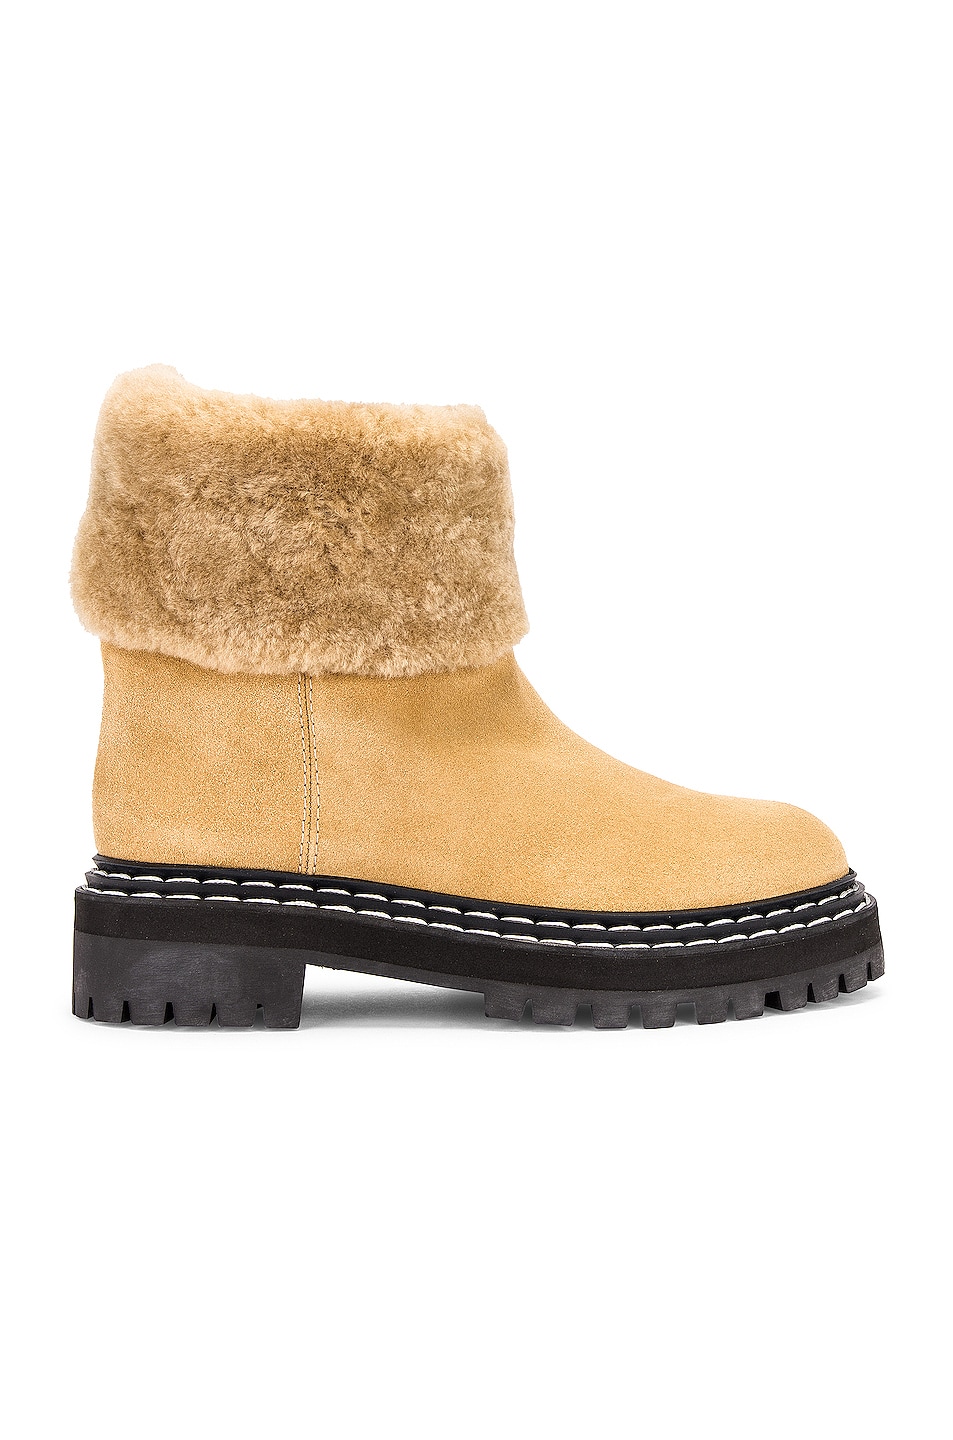 Image 1 of Proenza Schouler Lug Sole Shearling Ankle Boots in Beige